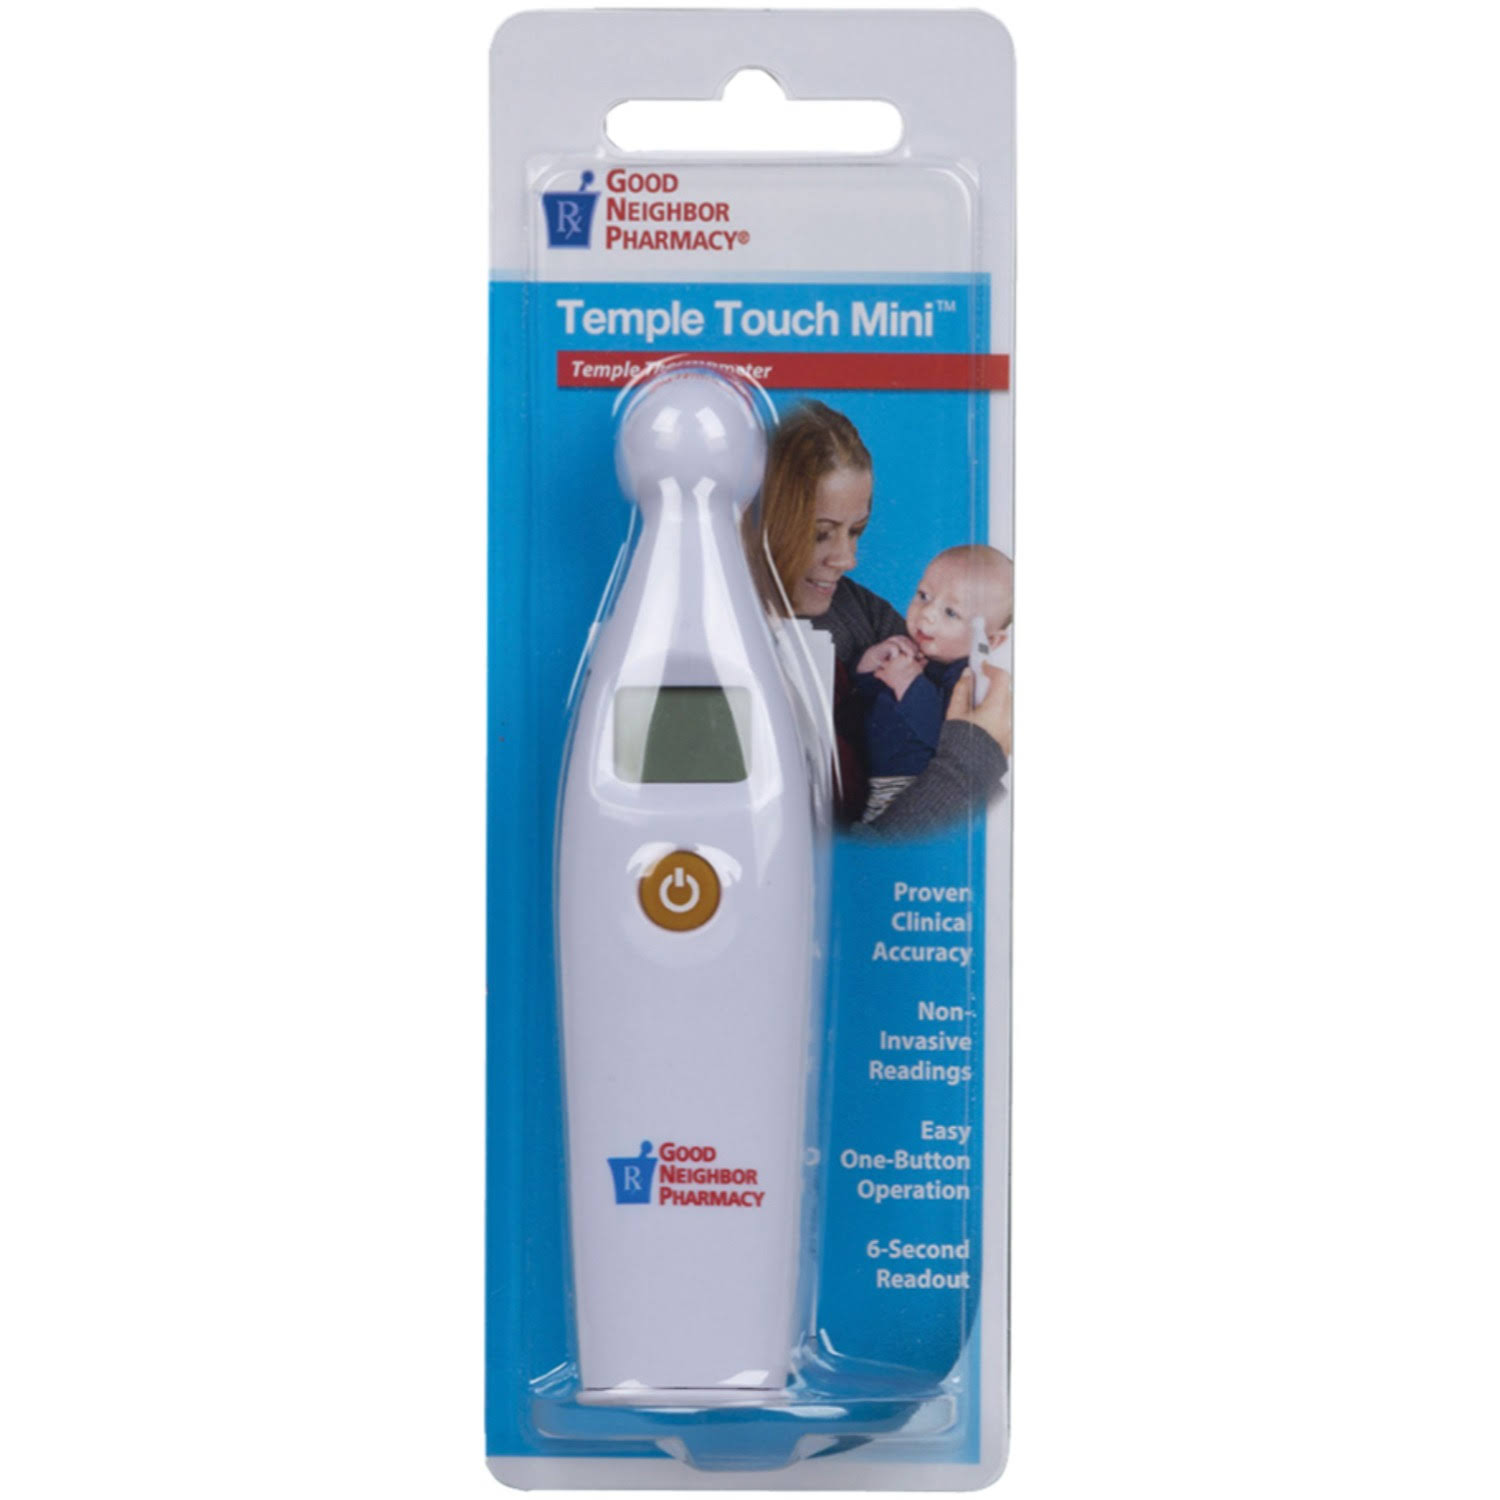 Good Neighbor Pharmacy Digital Thermometer Mini Temple Touch 6 Second Readout